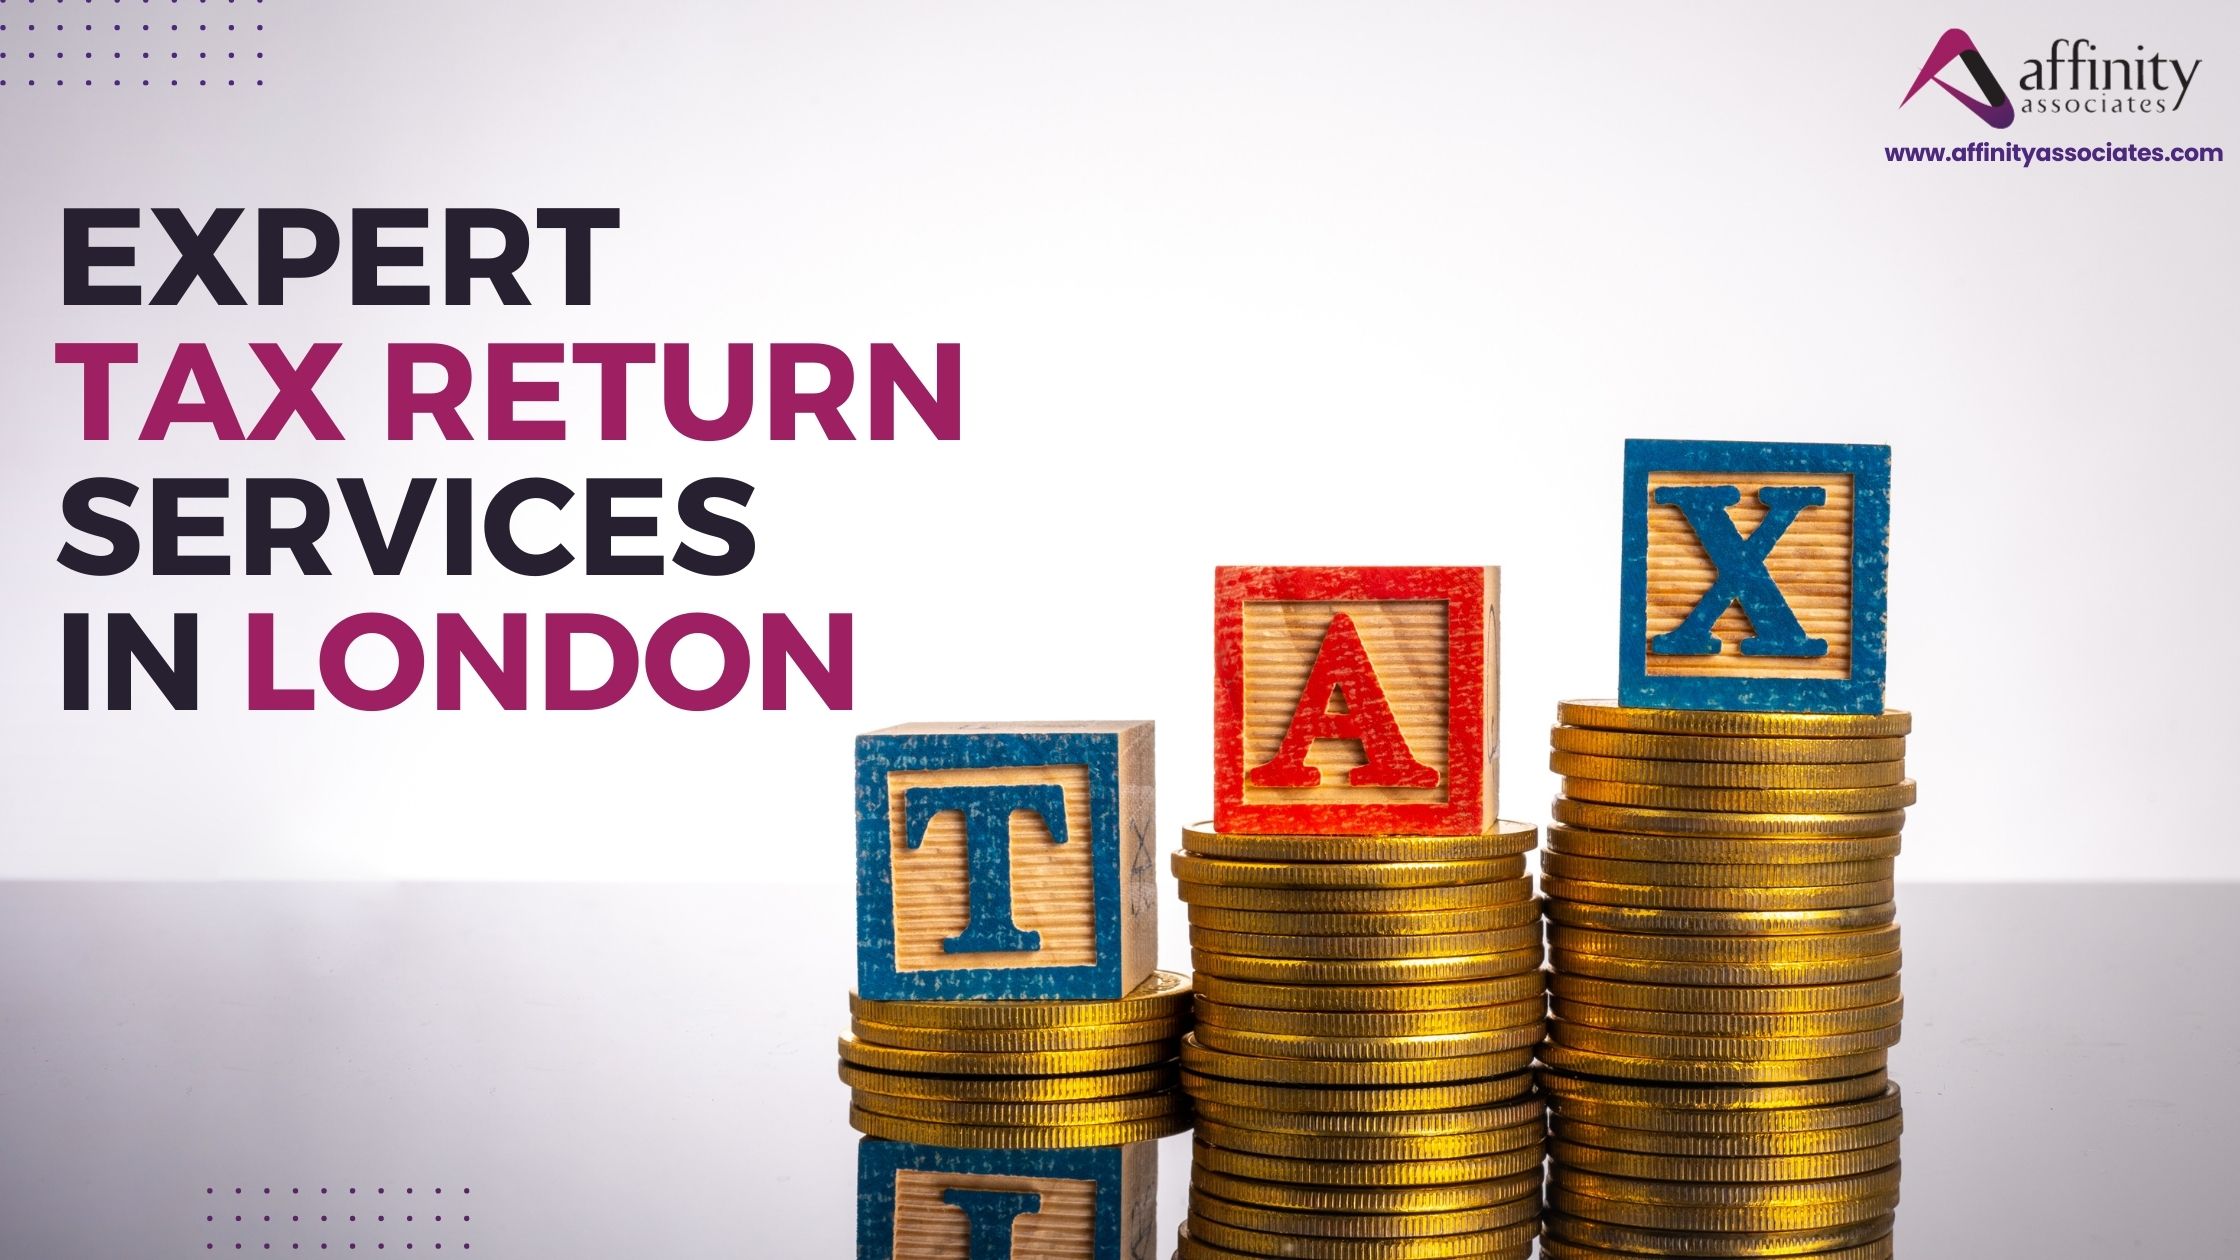 Expert Tax Return Services for Small Businesses in London [UK]